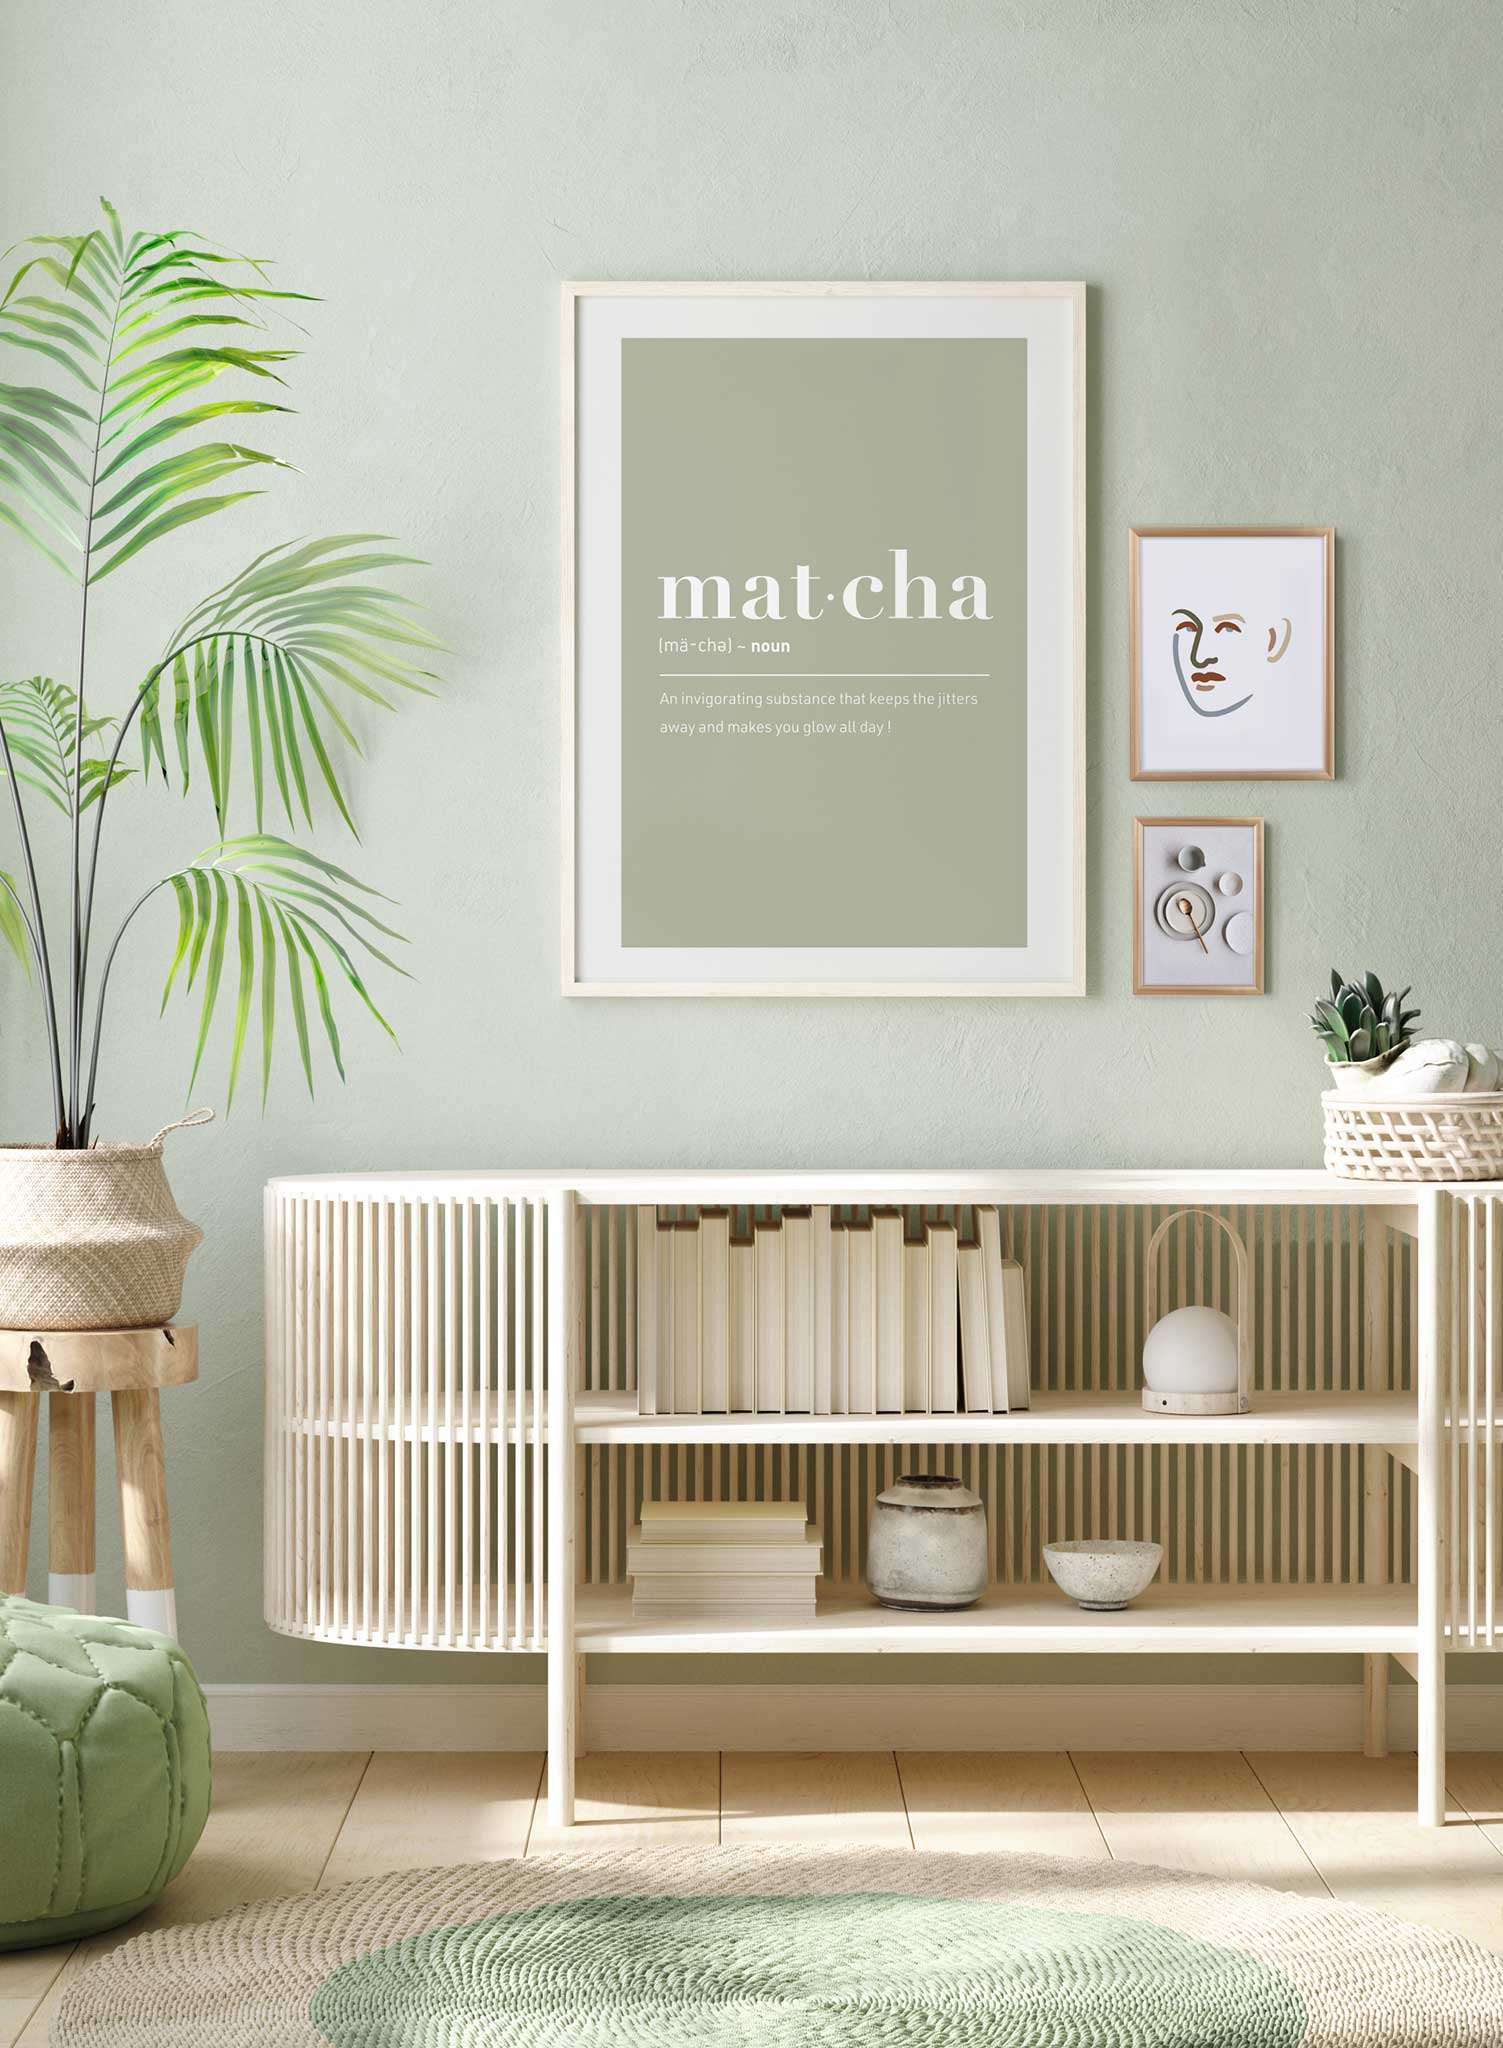 Matcha is a tea themed and humorous typography poster by Opposite Wall.